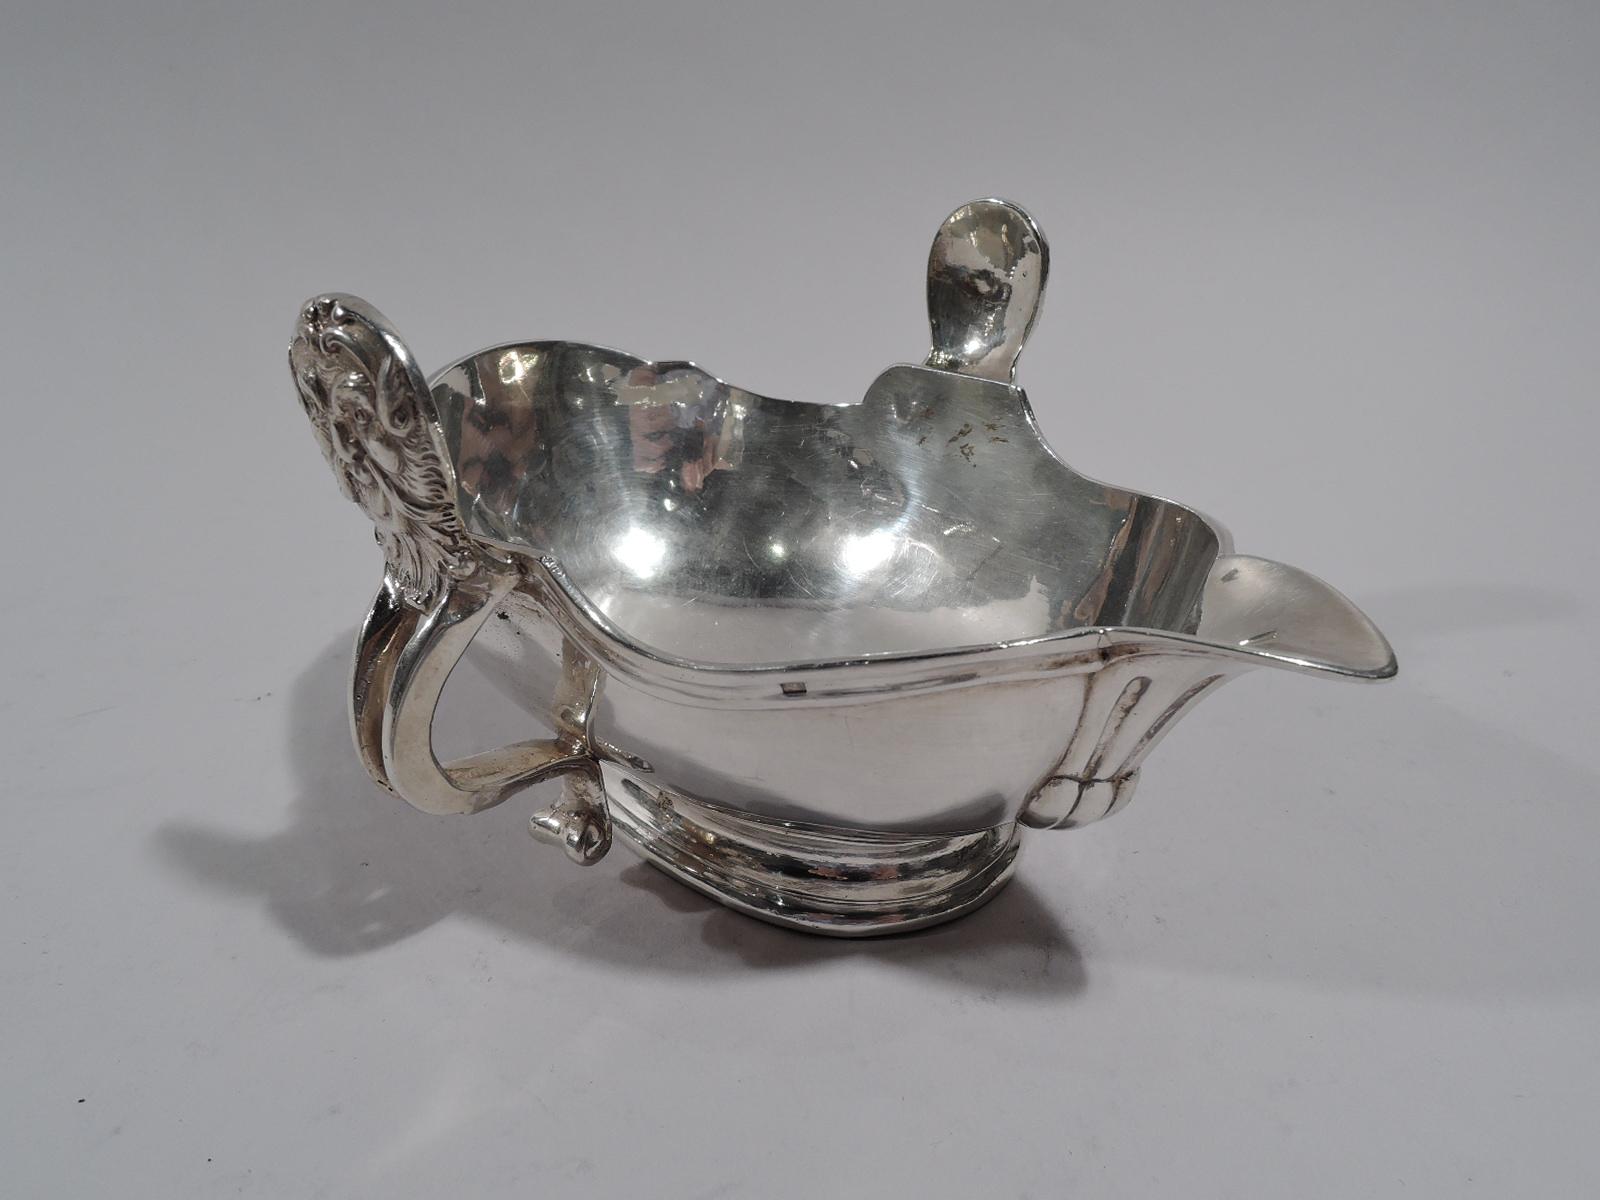 Baroque Antique European Silver Sauce Boat in 18th Century Style For Sale